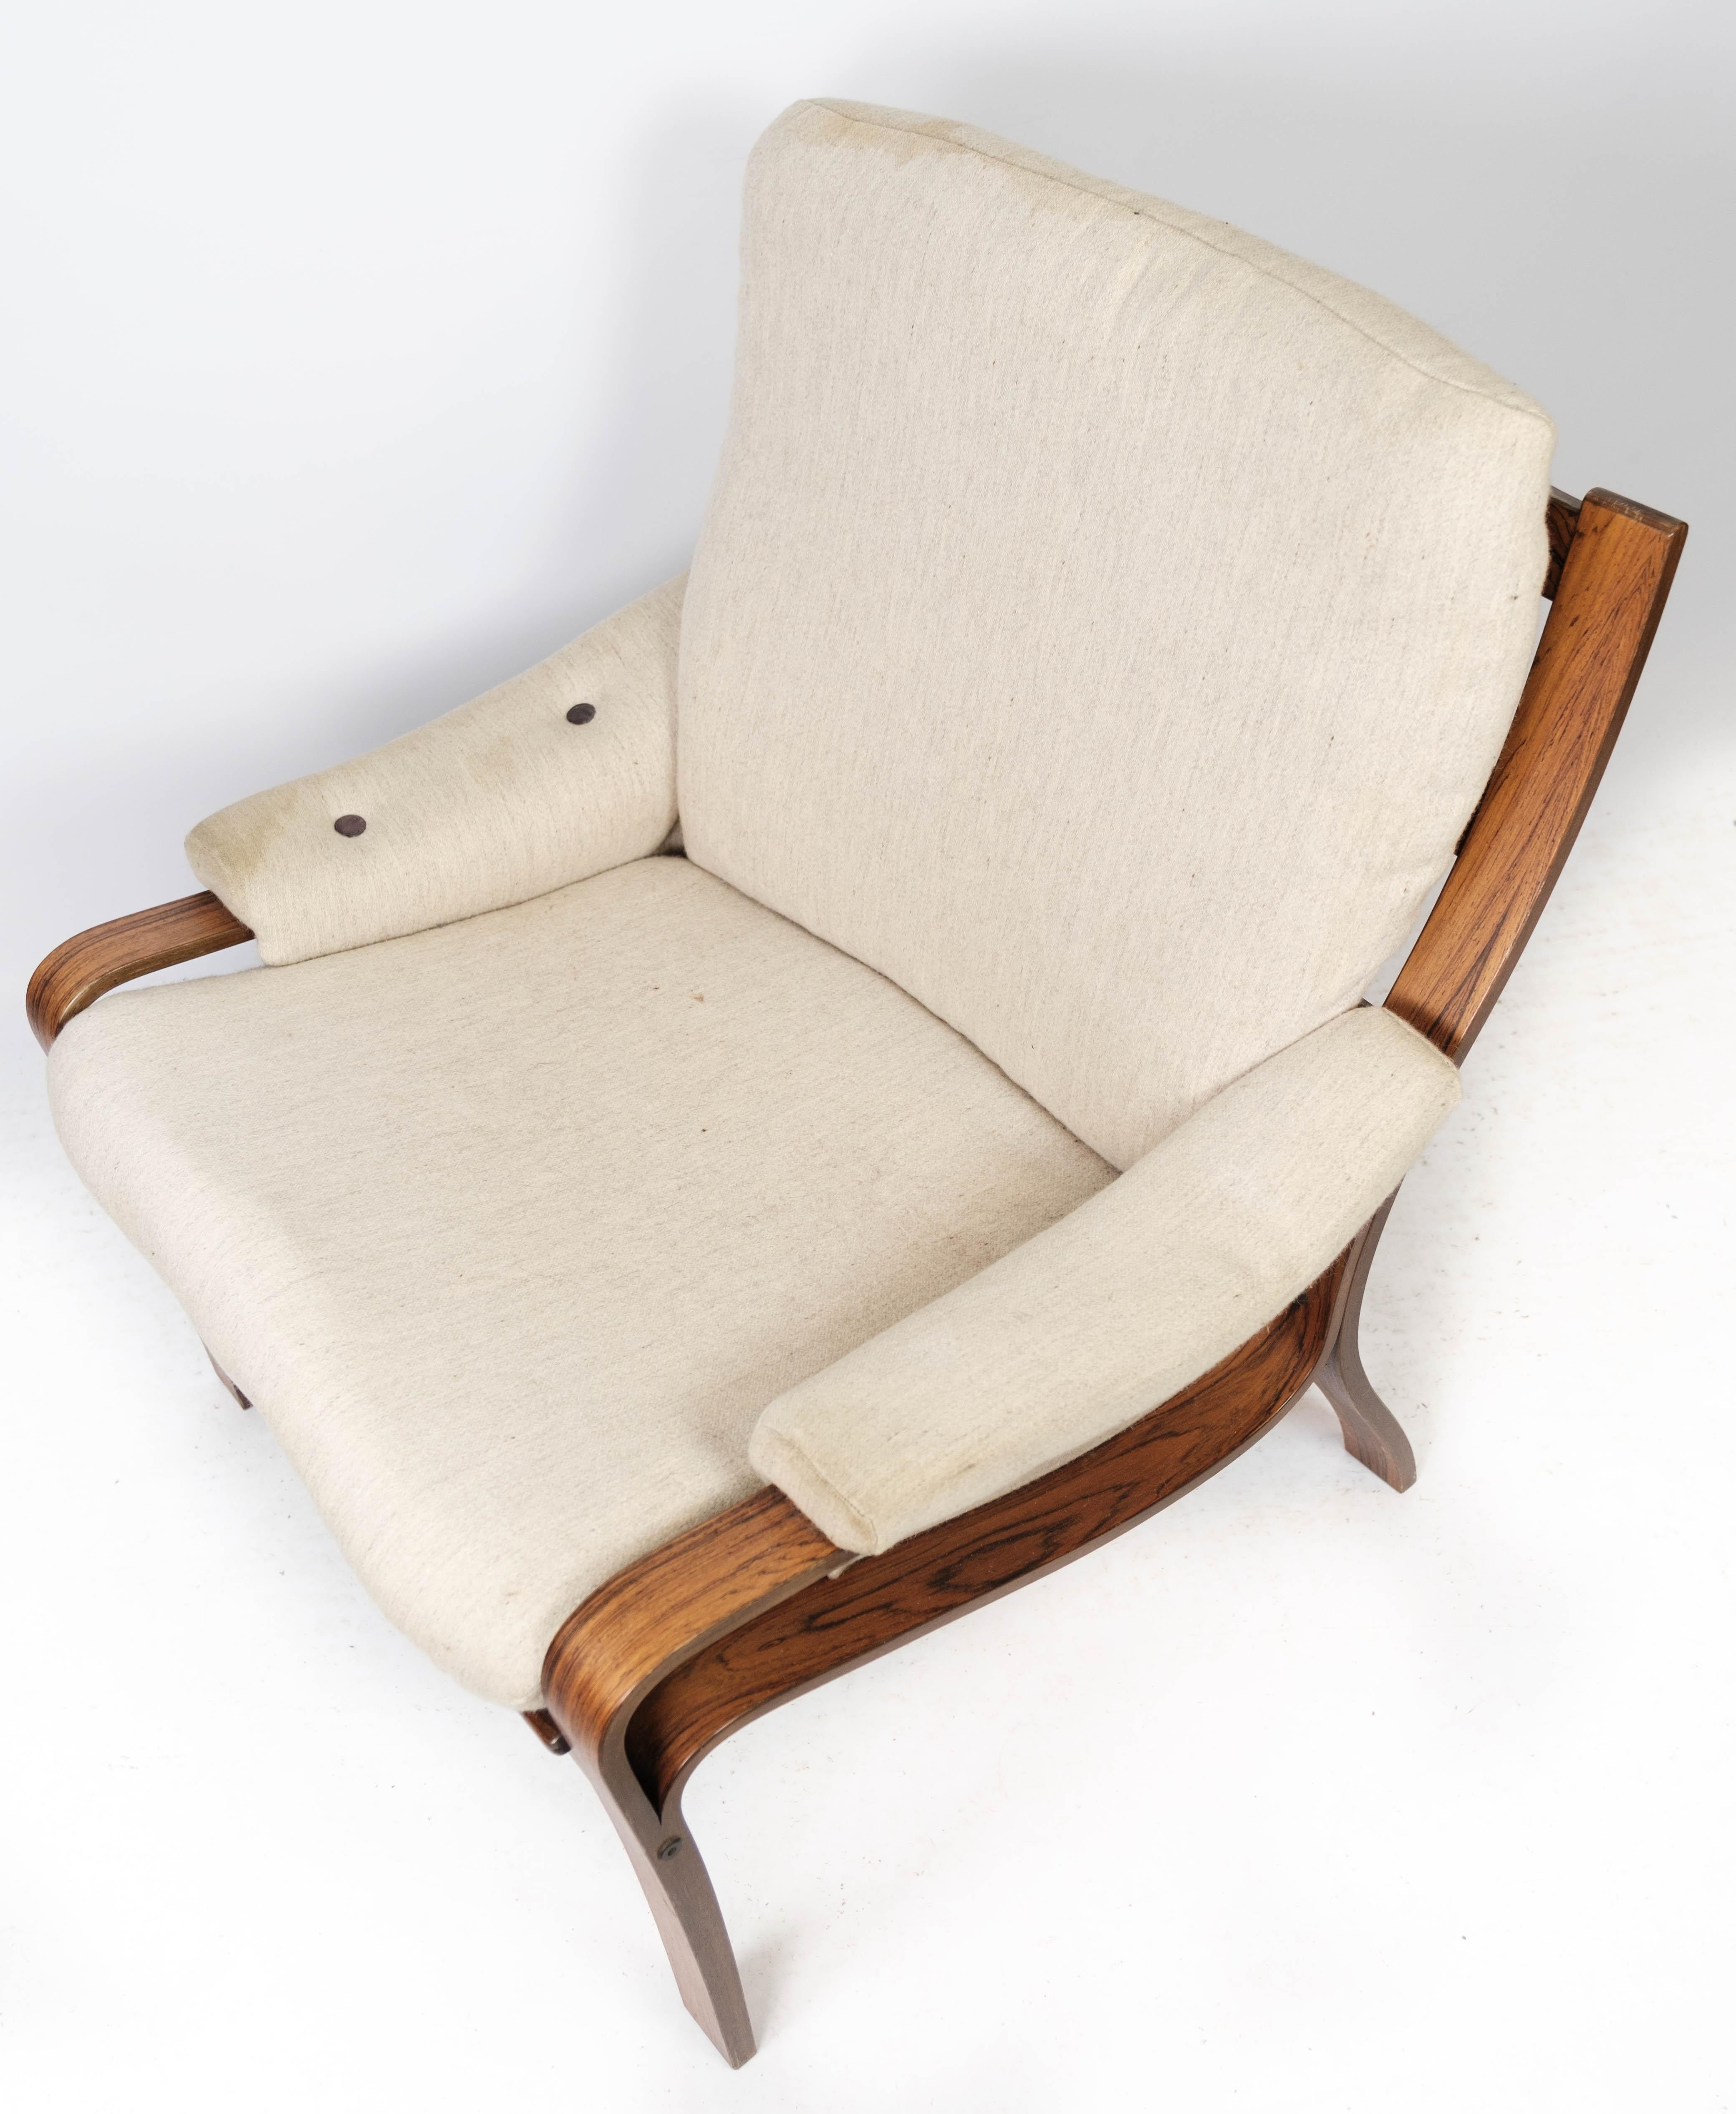 The armchair in rosewood, upholstered with light fabric and of Danish design from the 1960s, is an elegant and comfortable piece of furniture that exudes timeless beauty and craftsmanship.

The warm tones and beautiful natural pattern of the